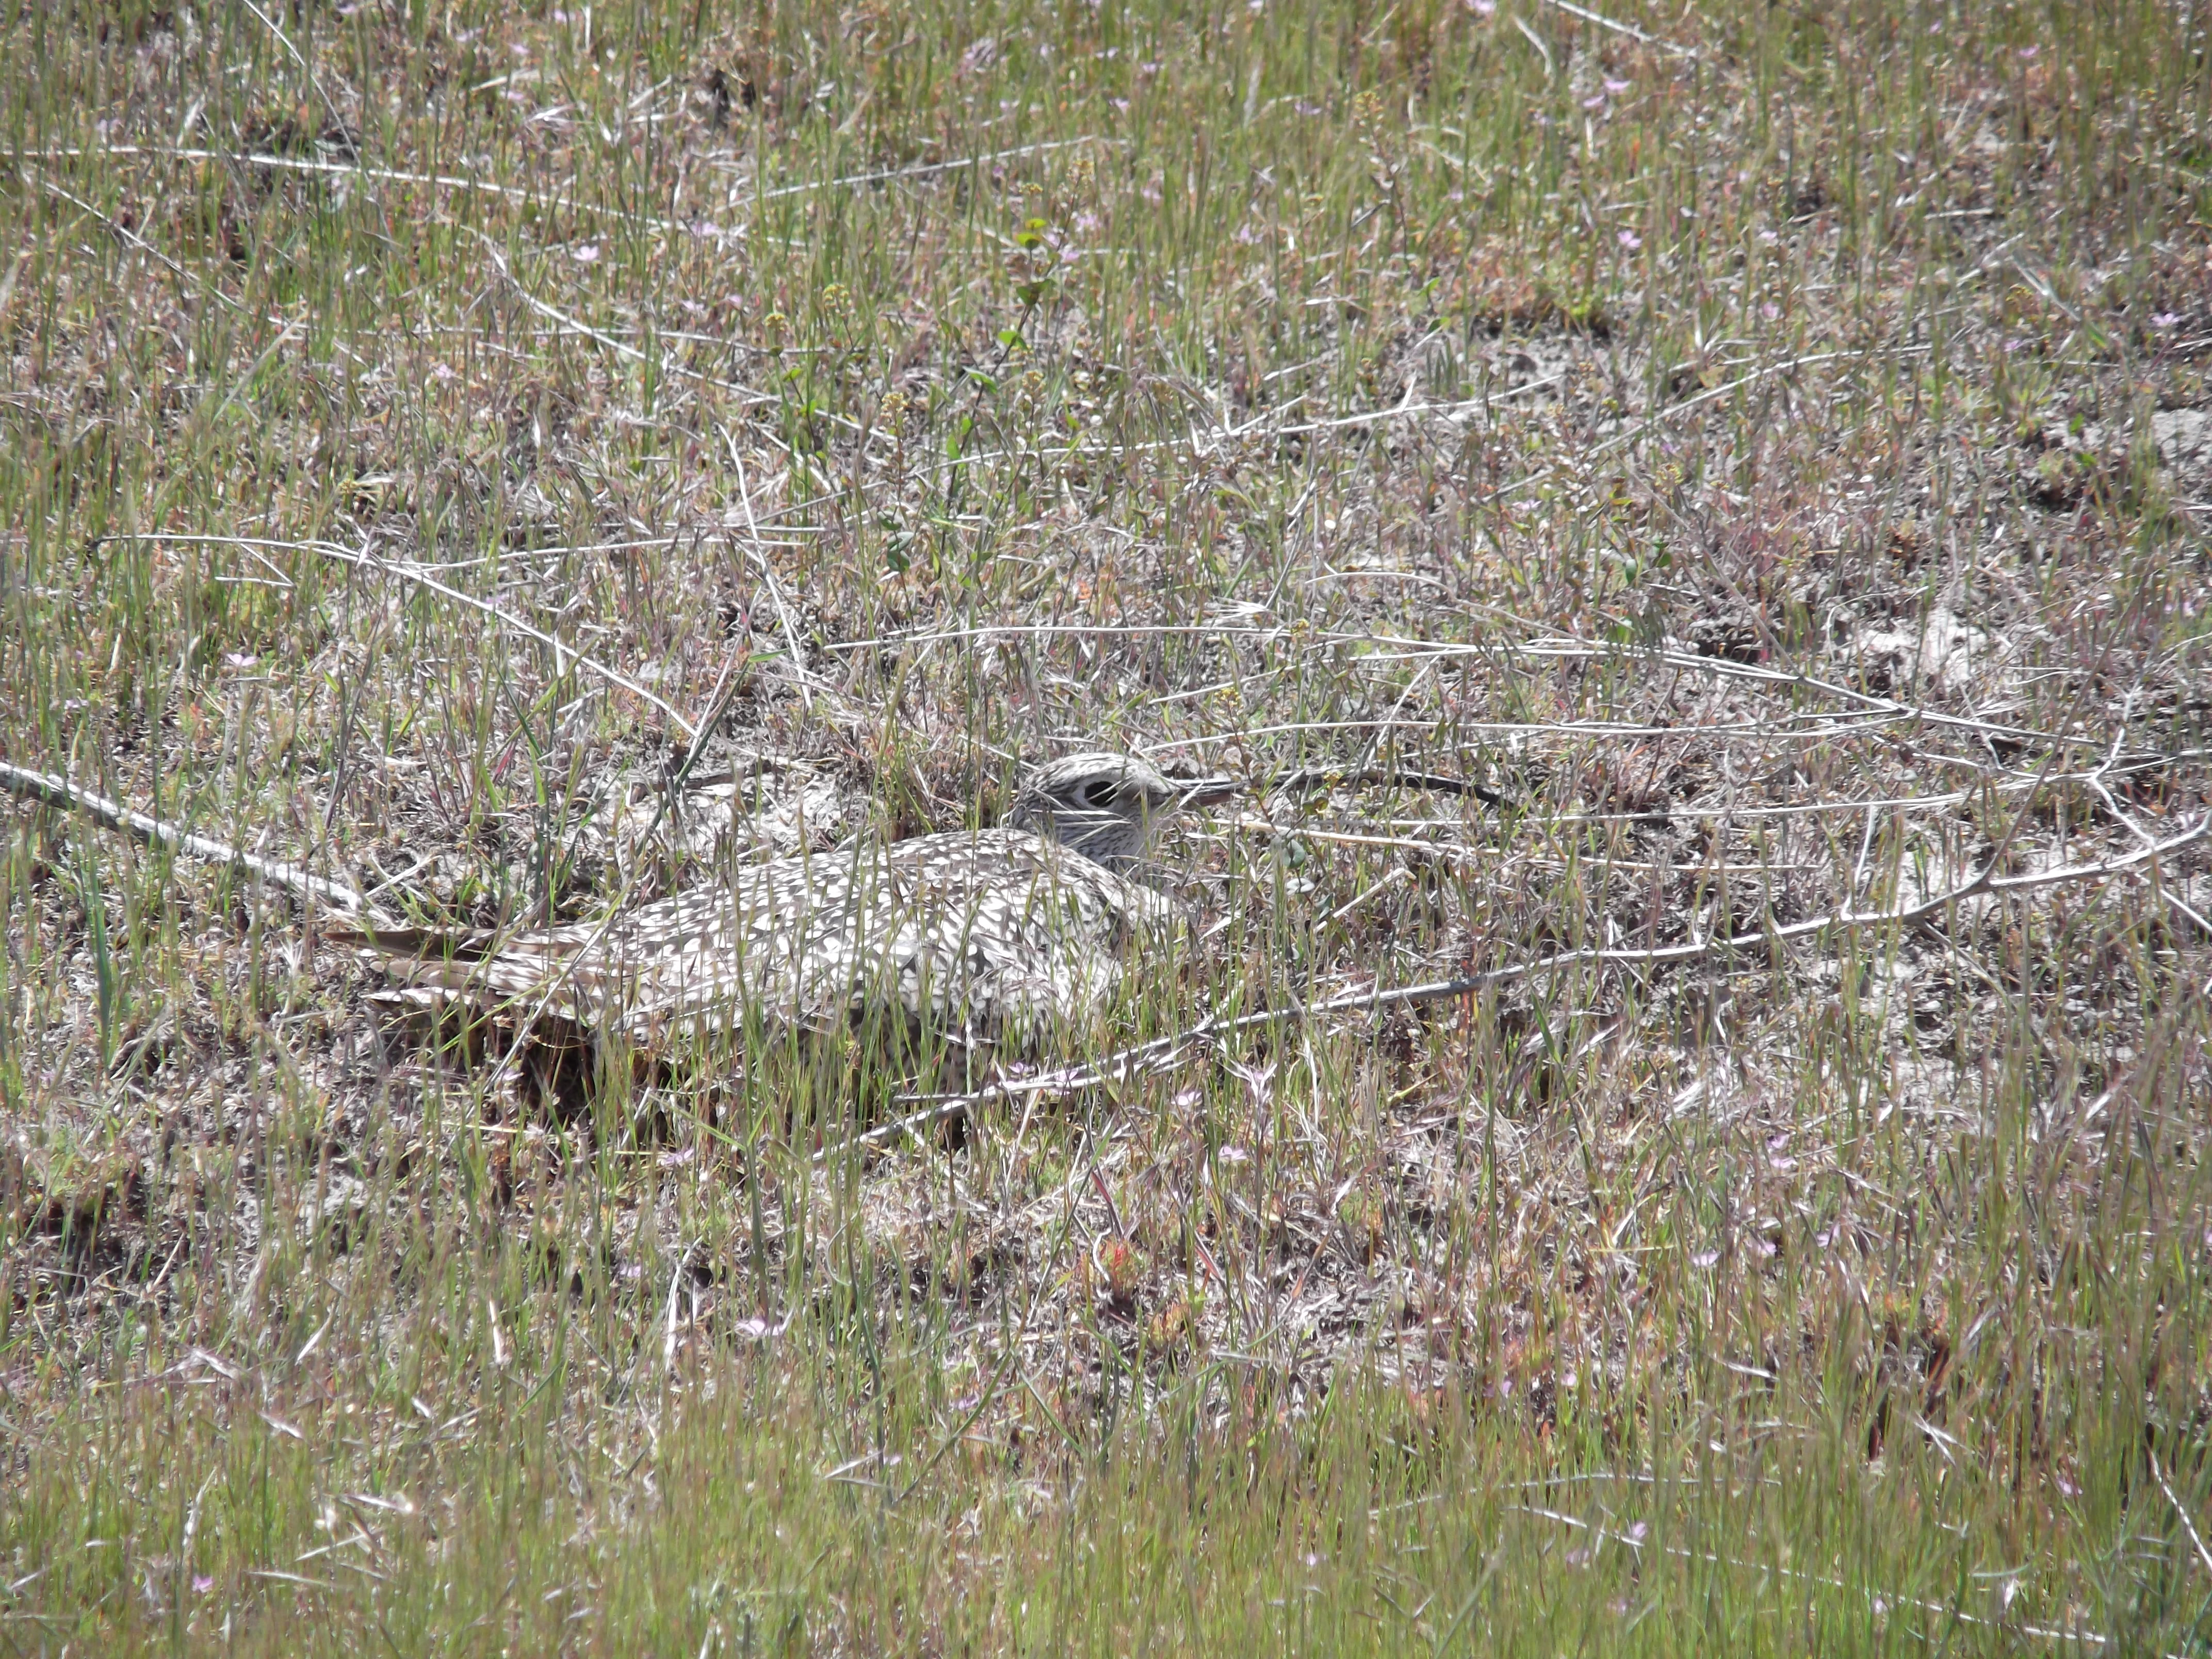 A curlew sitting tight on the nest. Photo by Jessica Pollock